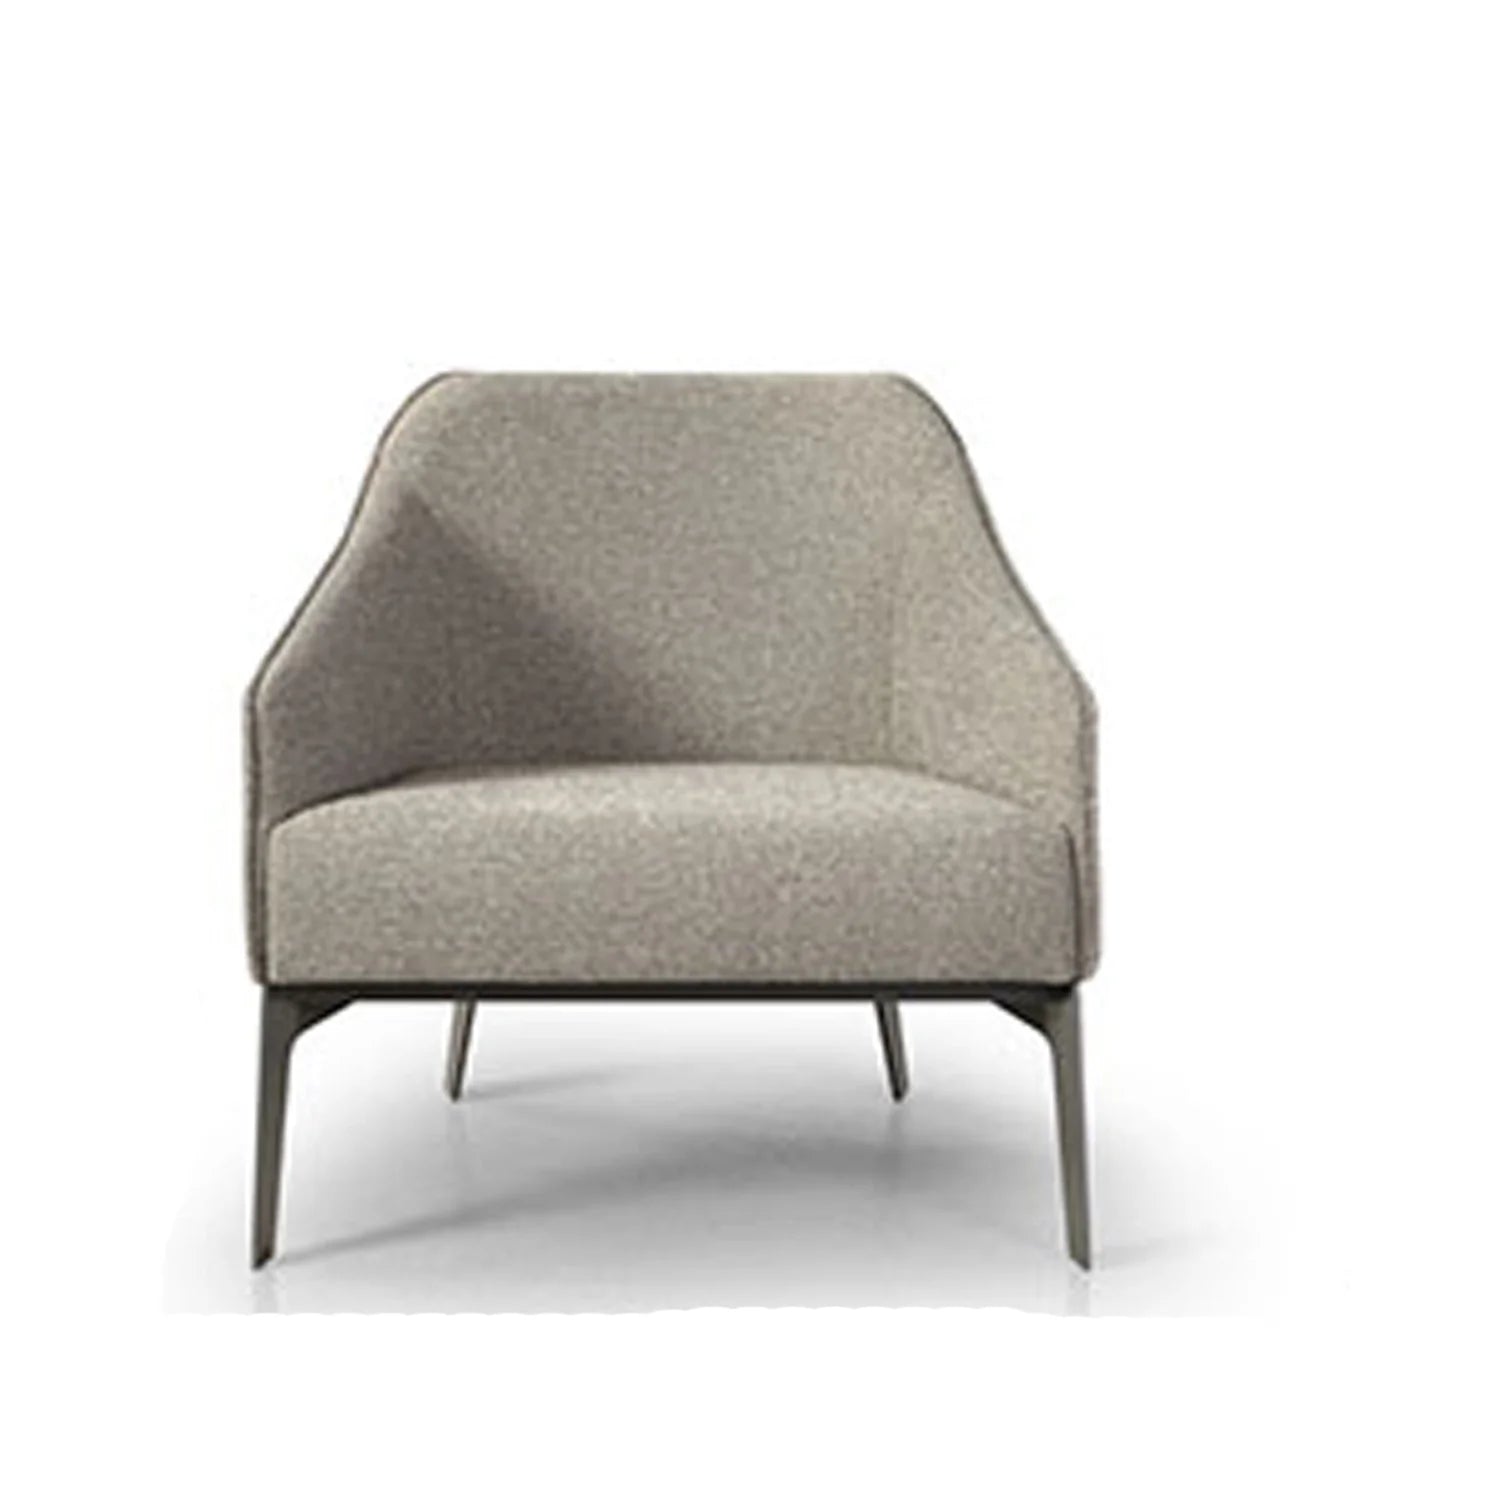 Sara Lounge Chair by Trica, made in Canada